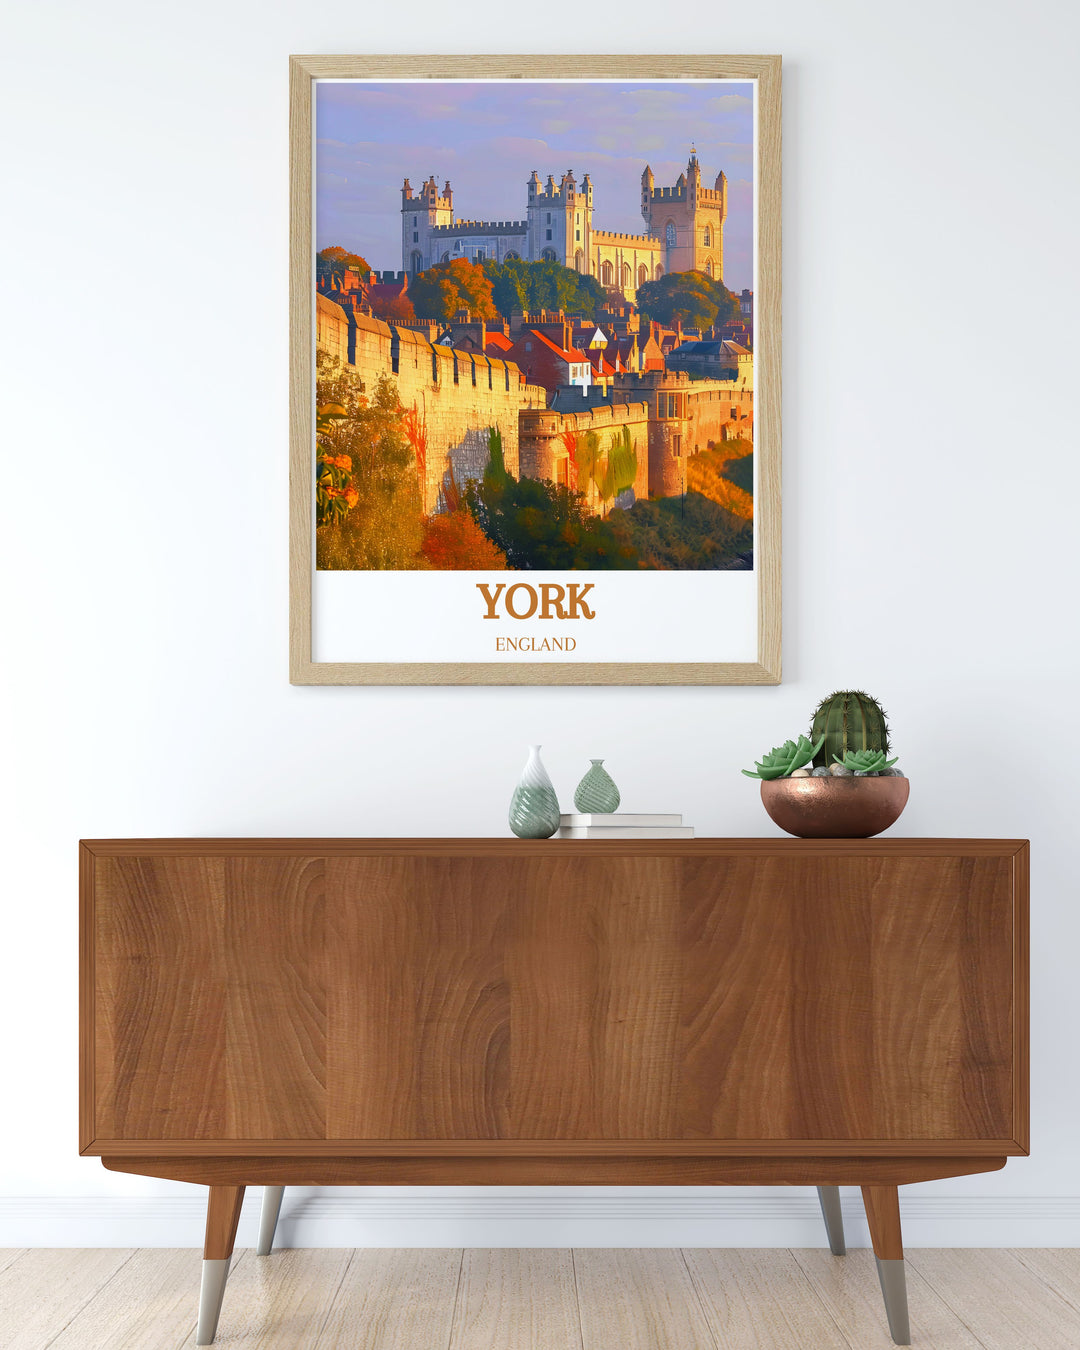 Framed Print of the North Yorkshire countryside showcasing the beauty of the Howardian Hills AONB. This piece blends natural landscapes with ENGLAND, york city walls history for a timeless art decor.